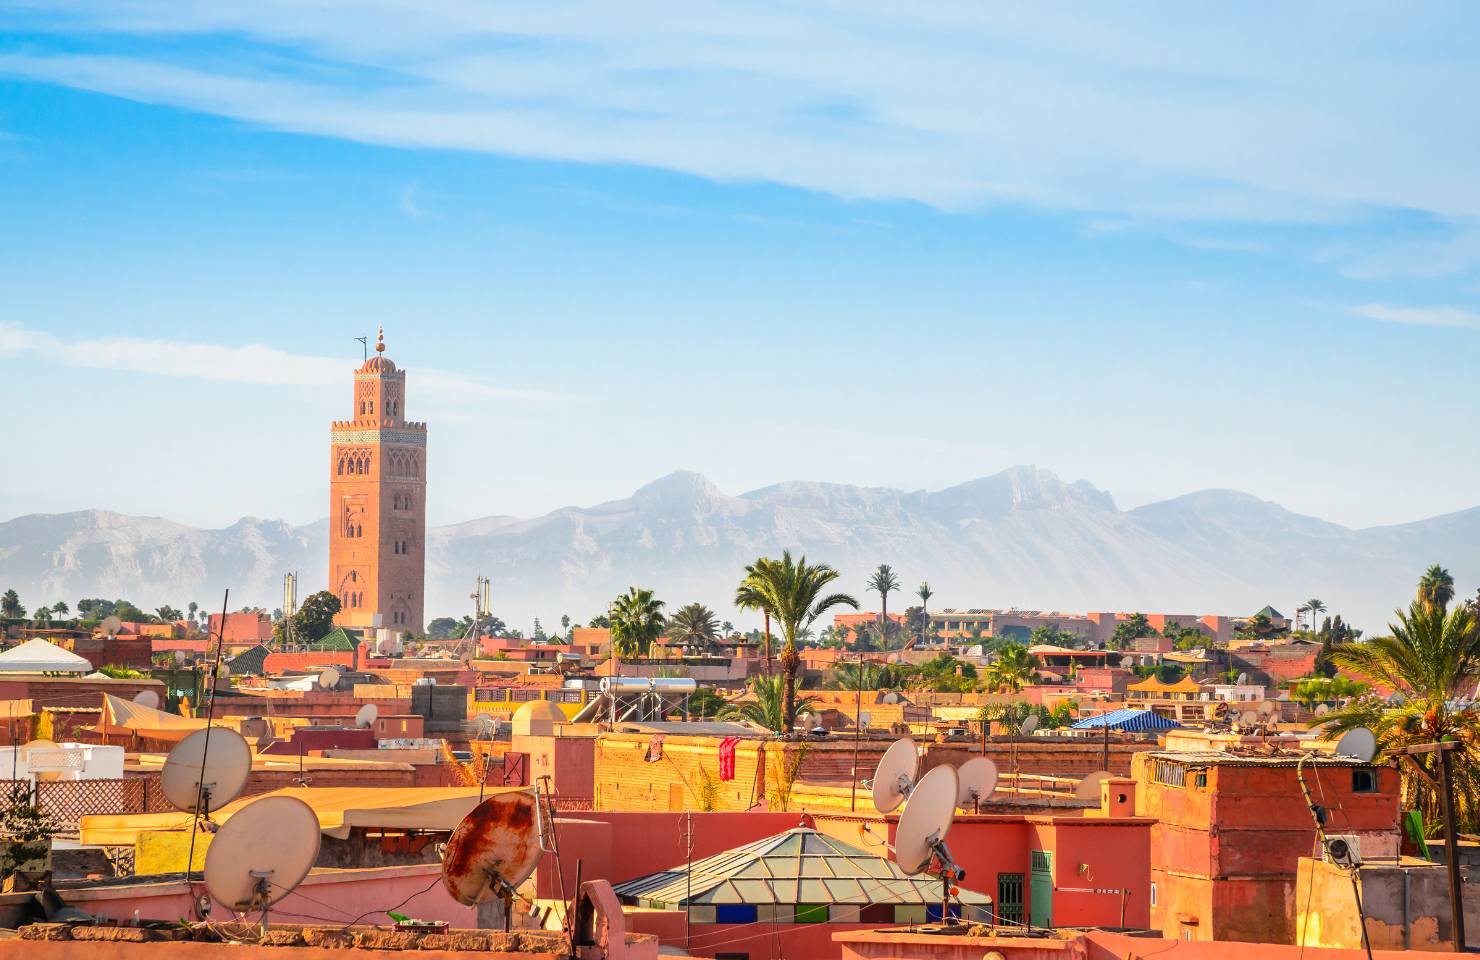 A view of Marrakesh Old Town